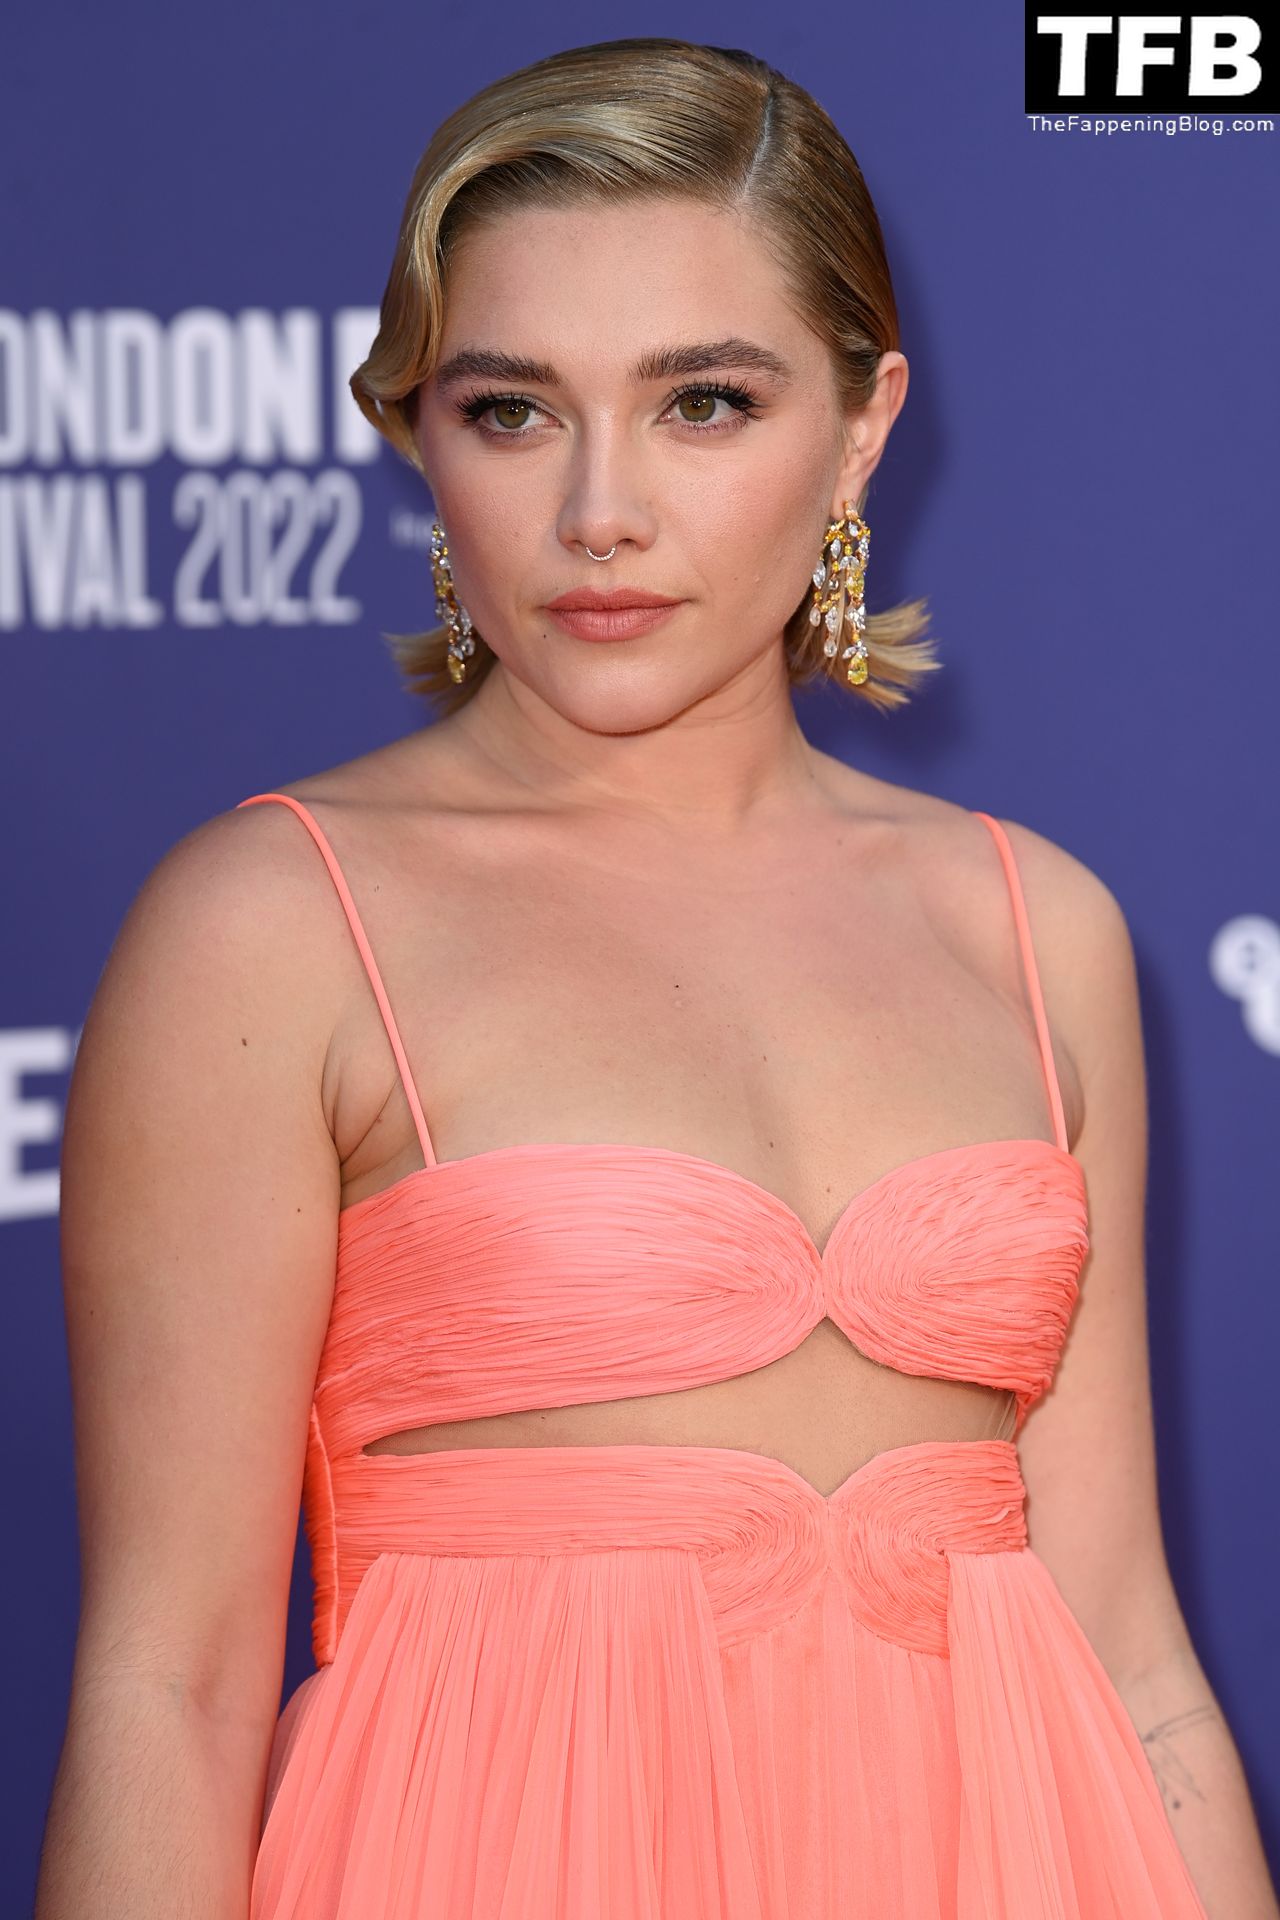 Florence-Pugh-Sexy-The-Fappening-Blog-66-1.jpg